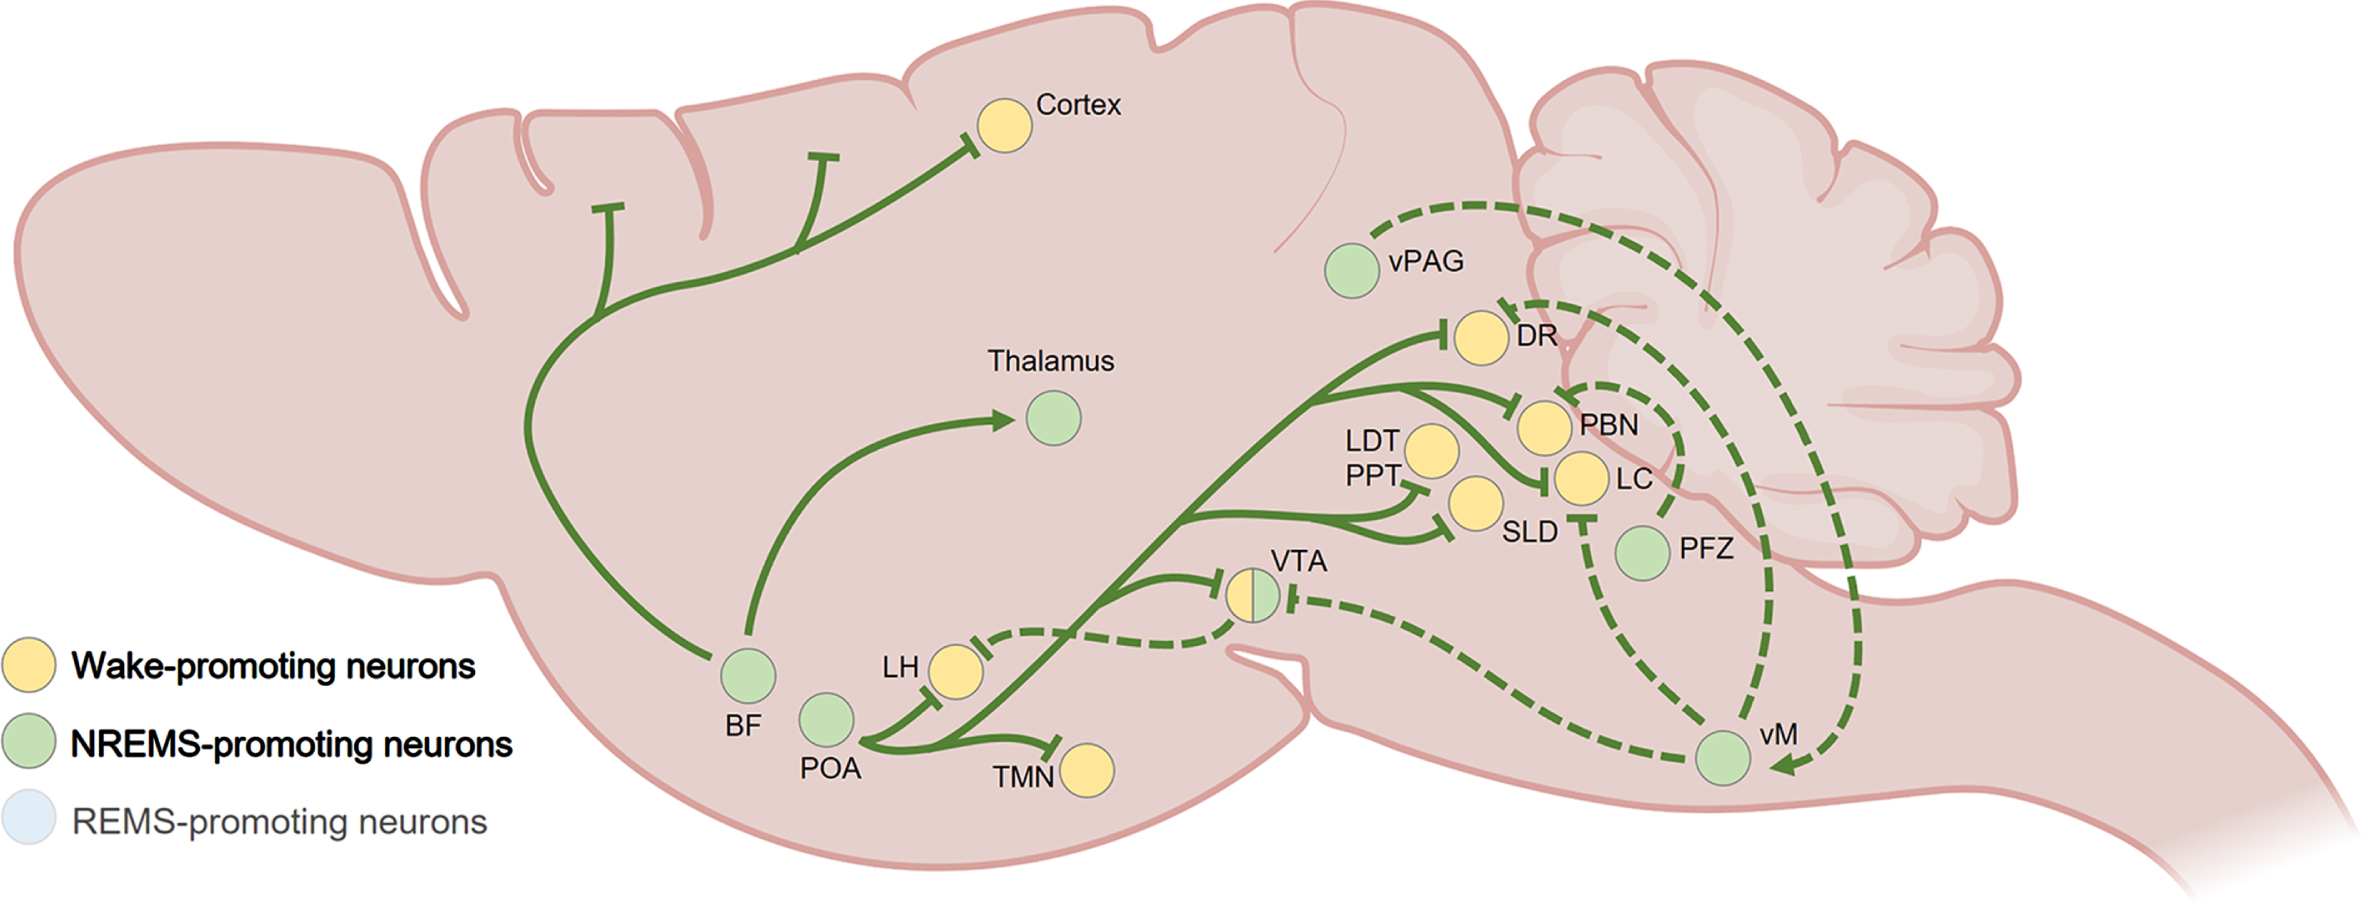 Summary of NREMS-promoting pathways in the rodent brain. The POA plays a key role in NREMS generation through GABAergic and galaninergic inhibitory projections to the wake-promoting LH, TMN, VTA, DR, LC, PBN, LDT, and SLD. Within the brainstem (dashed lines), the PFZ and vM participate to NREMS maintenance by inhibiting wake-promoting regions such as the VTA, LC, DR and PBN, while the activity of the vM is sustained by glutamatergic projections from the vPAG. The VTA also sends inhibitory GABAergic projections to the LH. The BF inhibits wake-promoting neurons throughout the cortex and is also involved in the generation of NREMS-associated delta waves and spindle oscillations by sending axonal terminals in the thalamus. BF, basal forebrain; DR, dorsal raphe; LC, locus coeruleus; LDT, laterodorsal tegmental nucleus; LH, lateral hypothalamus; PBN, parabrachial nucleus; POA, preoptic area of the hypothalamus; PPT, pedunculopontine tegmental nucleus; PFZ, parafacial zone; SLD, sublaterodorsal tegmental nucleus; TMN, tuberomammillary nucleus of the hypothalamus; vM, vental medulla; vPAG, ventral periaqueductal gray; VTA, ventral tegmental area. Created with BioRender.com.